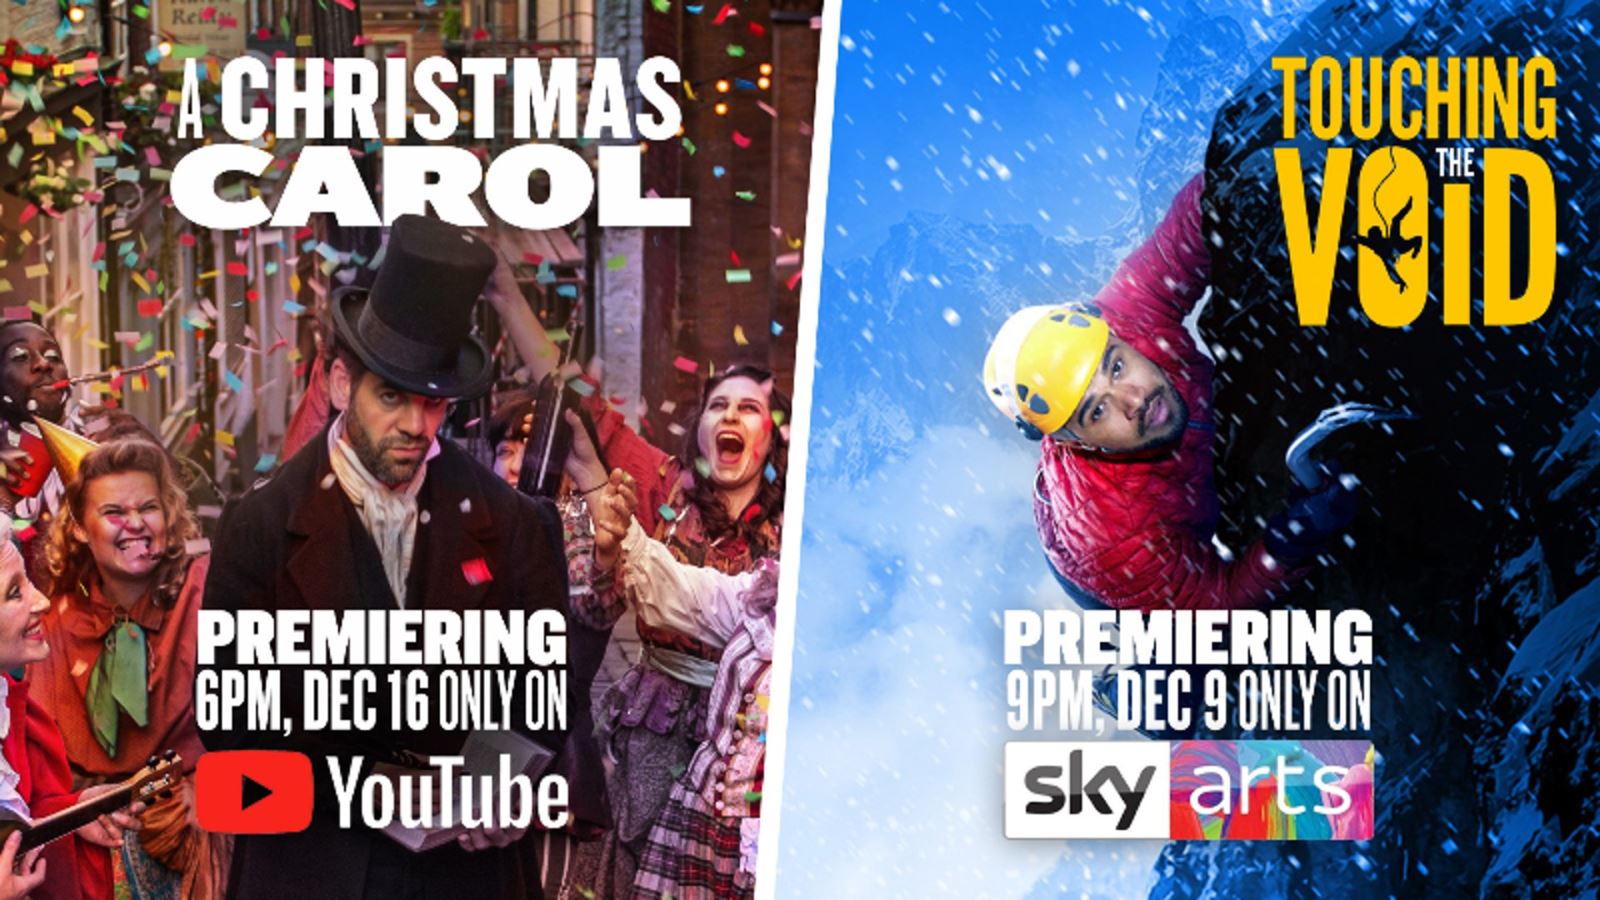 Digital Premieres of Bristol Old Vic shows from Sky Arts and YouTube this Dec